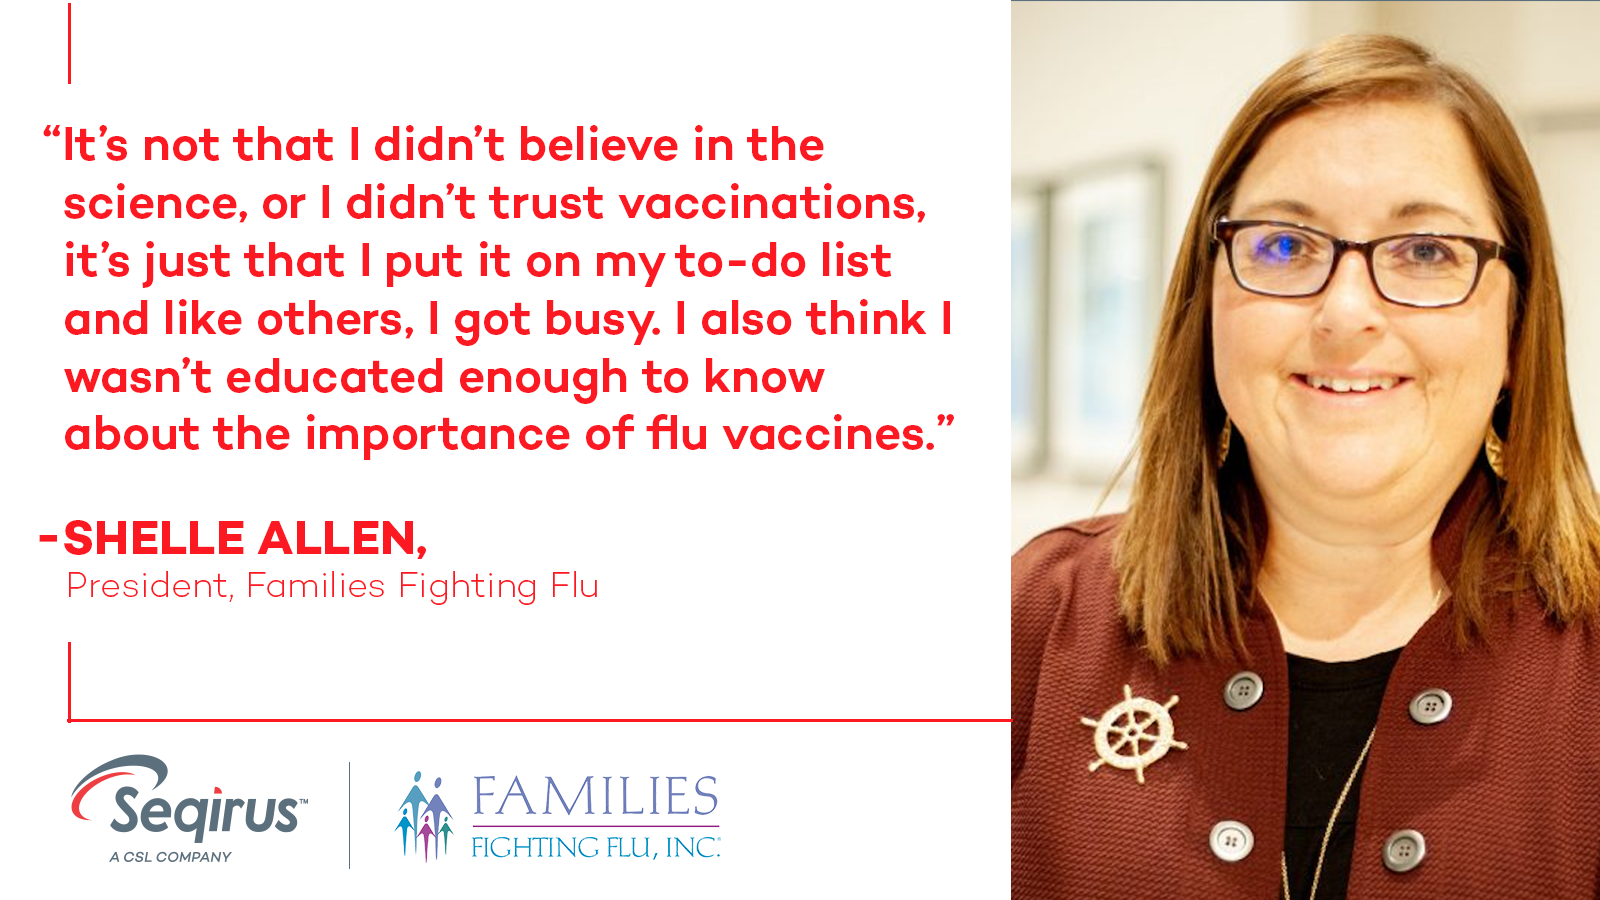 Shelle Allen, President of Families Fighting Flu, shares her family's encounter with influenza.